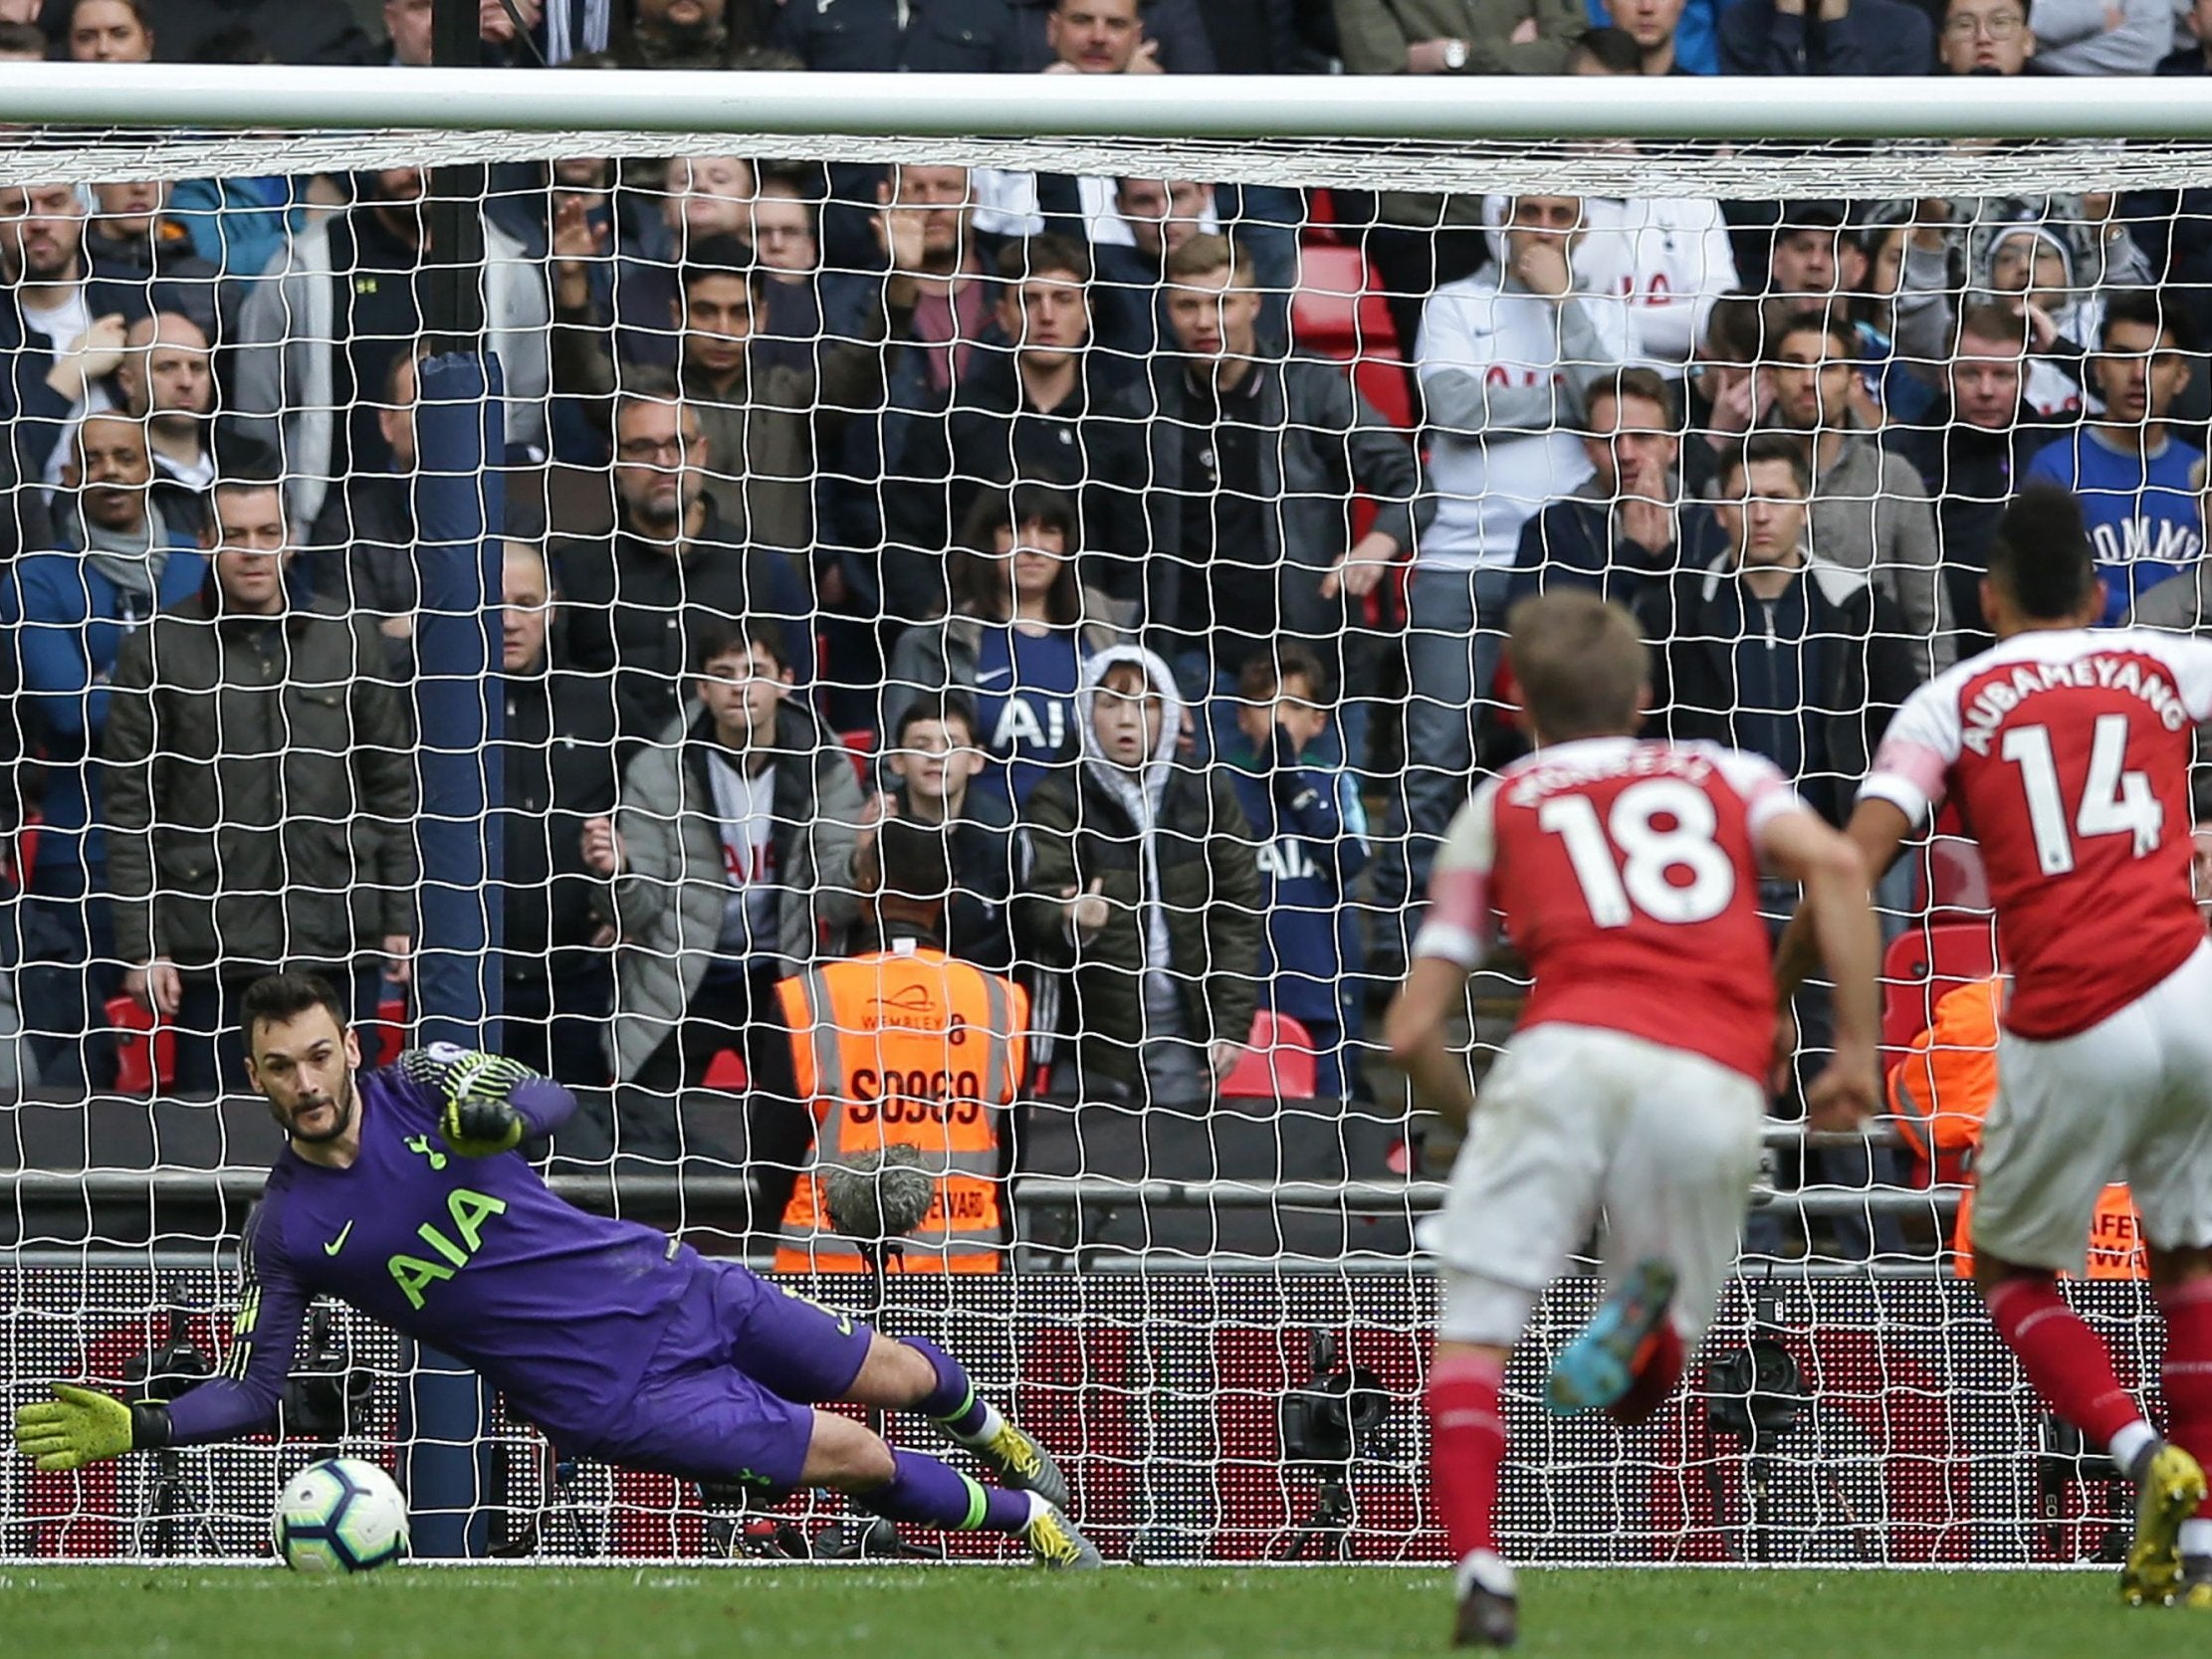 Hugo Lloris saved Pierre-Emerick Aubameyang's penalty to see Tottenham draw with Arsenal (AFP/Getty)